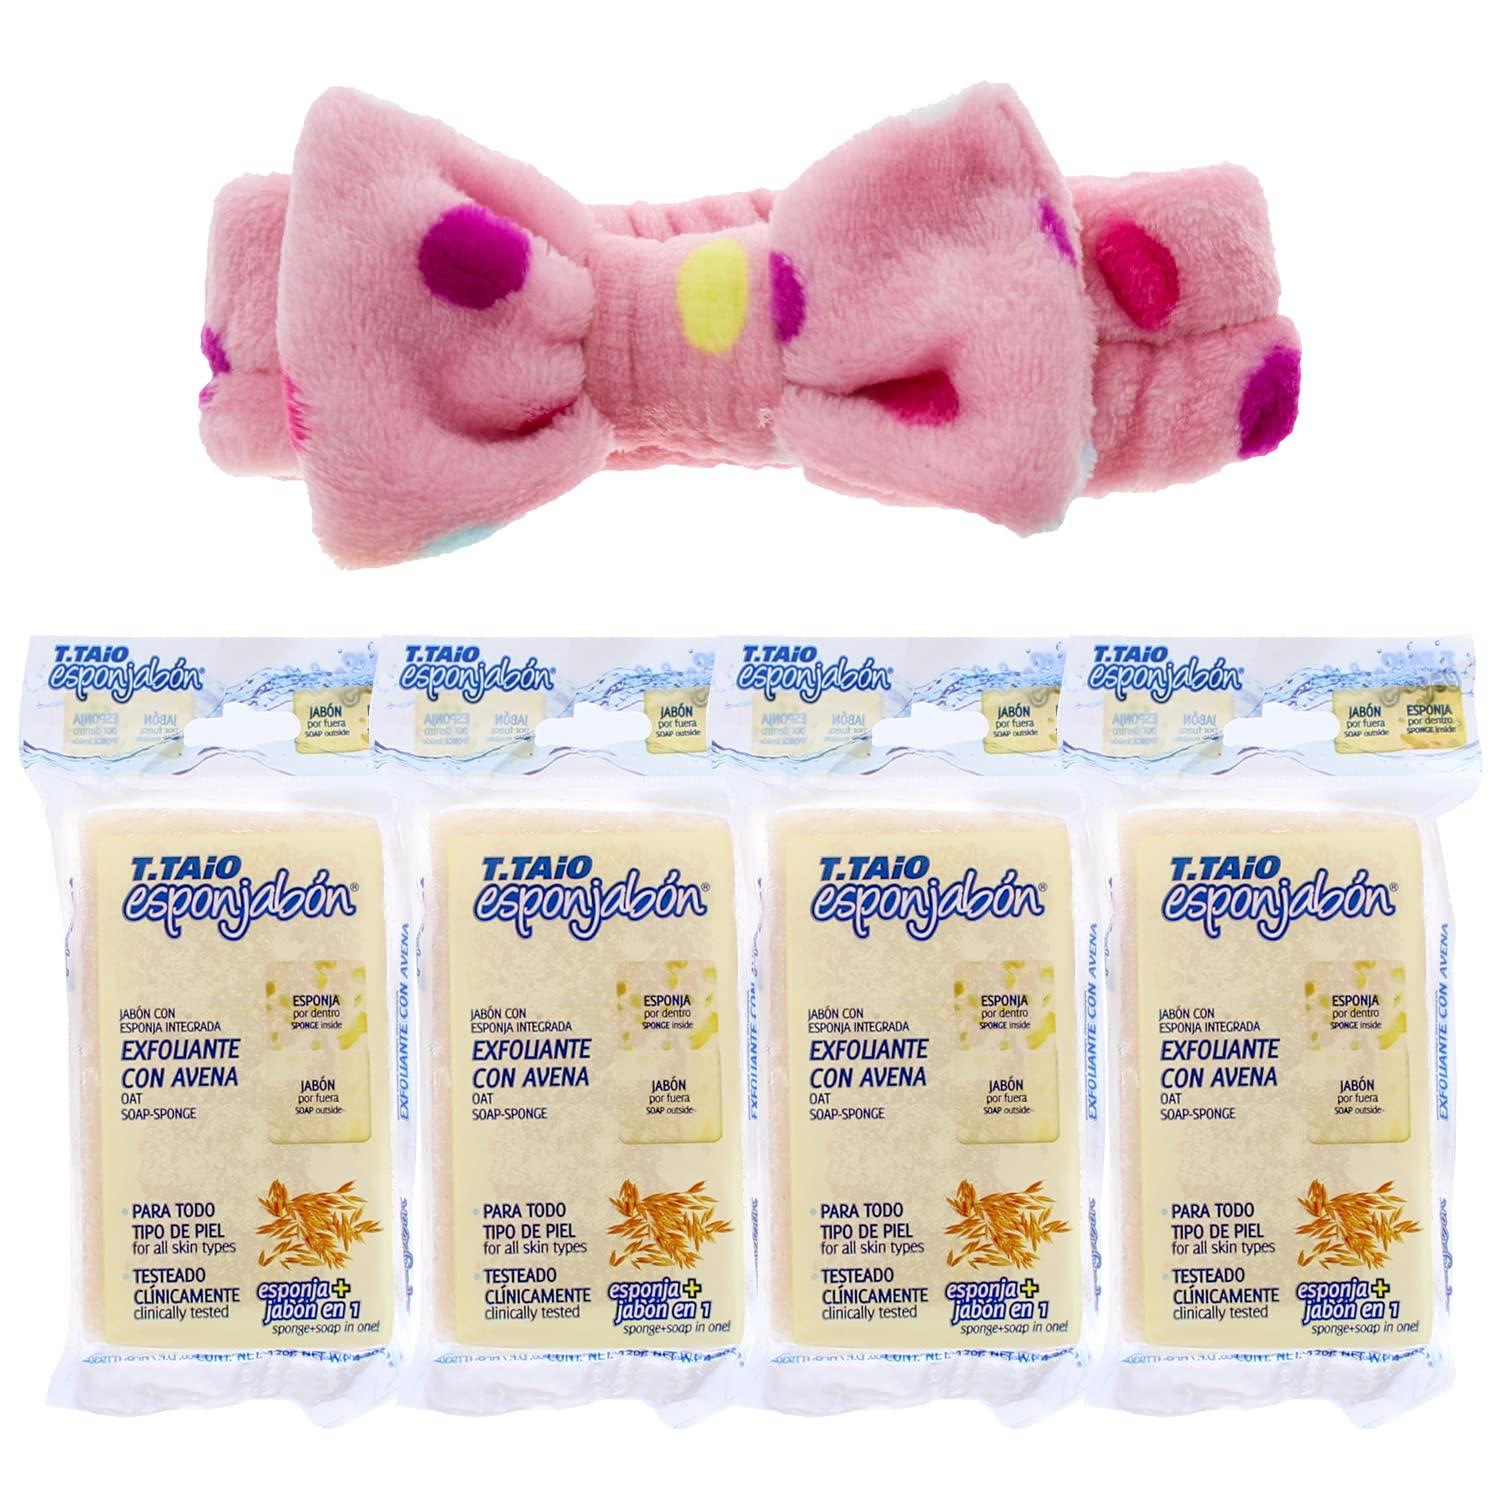 T. Taio Esponjabon Skin Lightening Oatmeal Exfoliating Soap Sponge (Avena)  Pack of 4 Bundle with Premium Penguin Spa Bow Headband(s)- Designs May  Vary. Perfect for Valentine's Day.